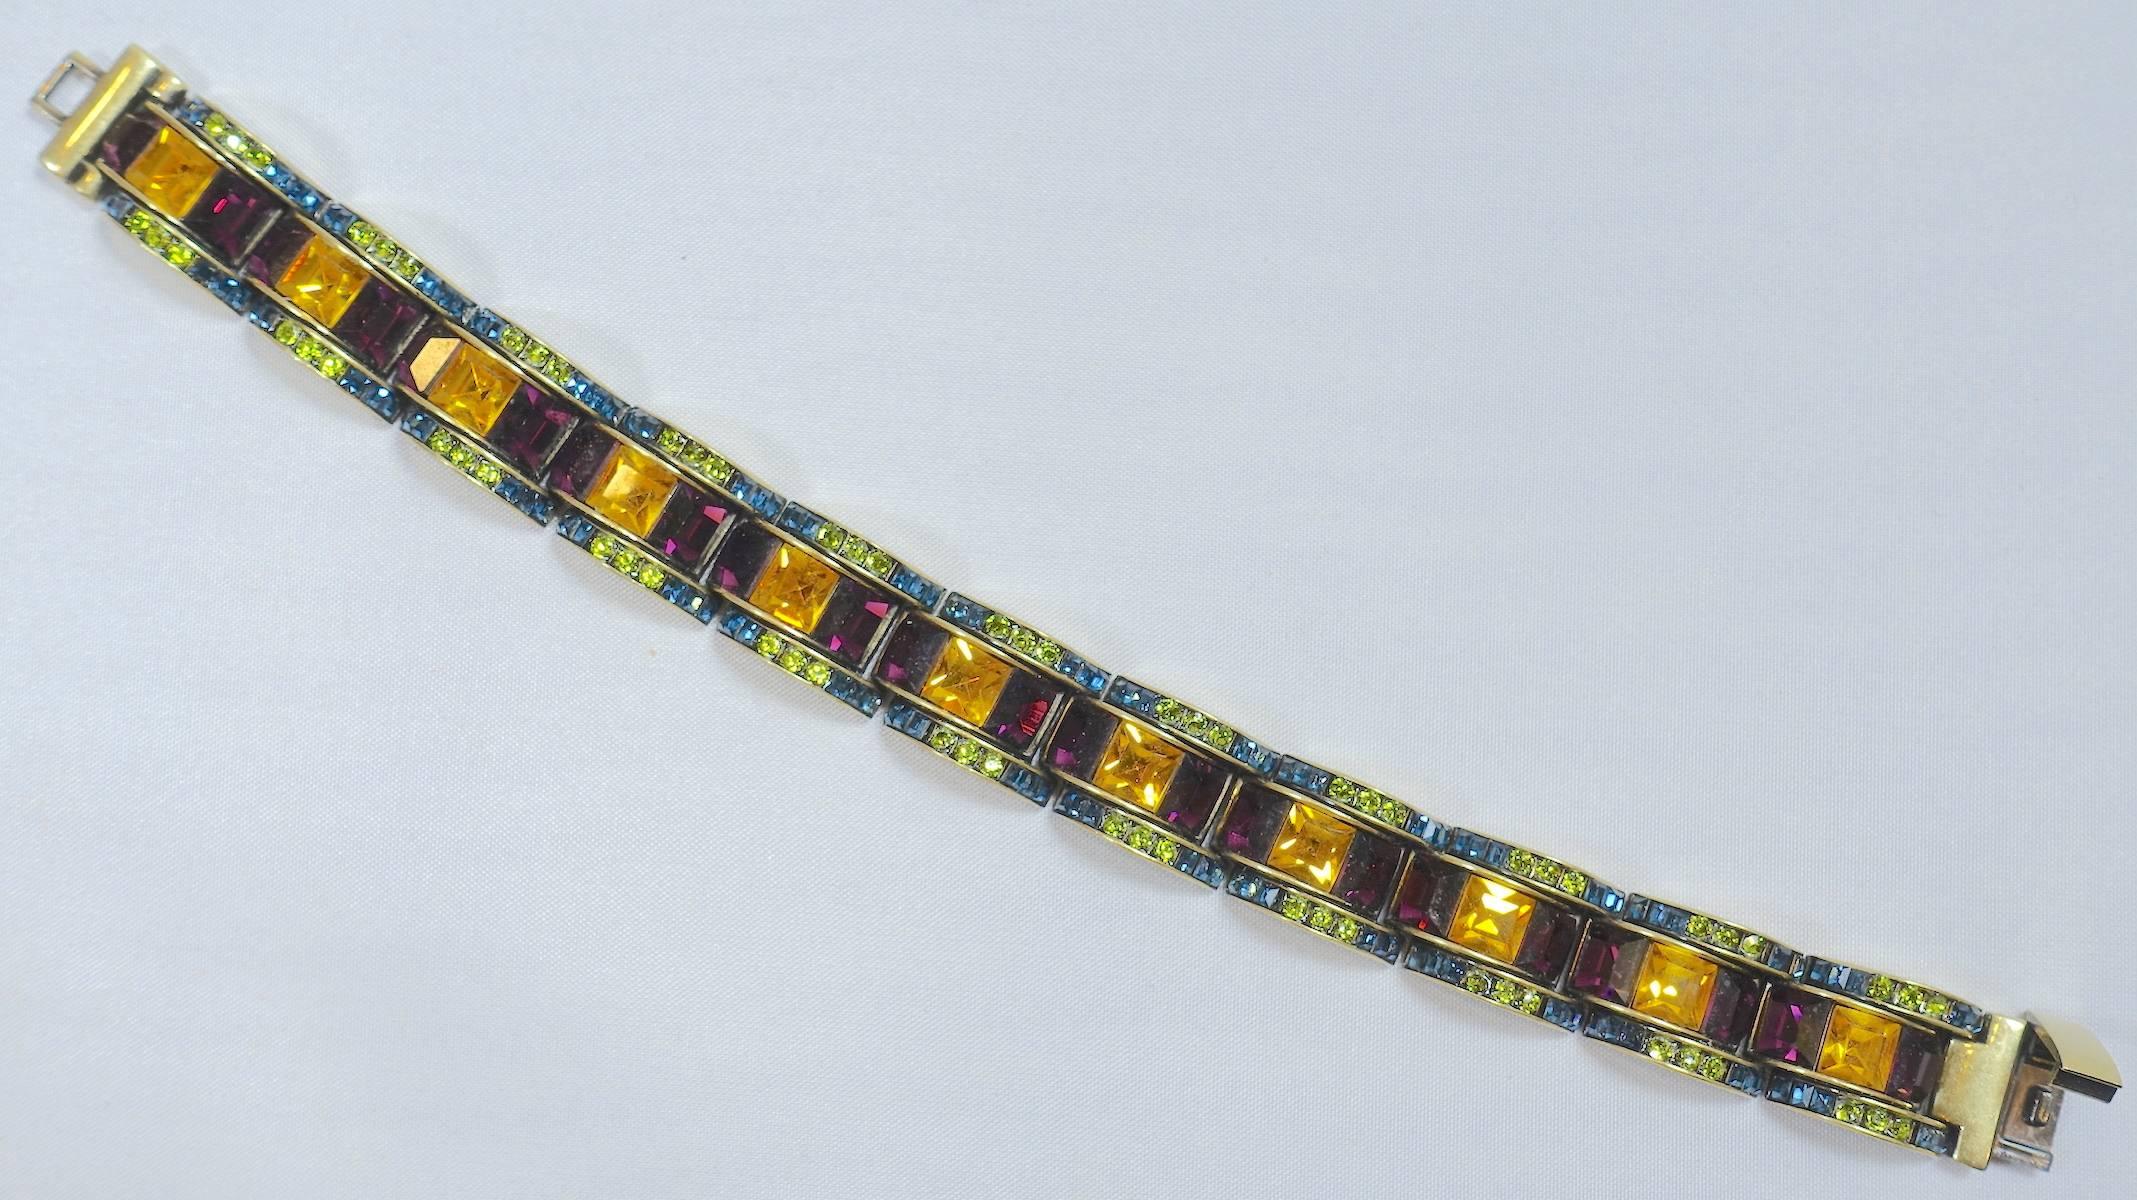 This is a rare deco multicolor stone heavy brass bracelet. The larger stones are purple and citrine accented by smaller green and blue stones that are set in a scalloped line. The bracelet is a rare find and is an elegant showstopper! In excellent